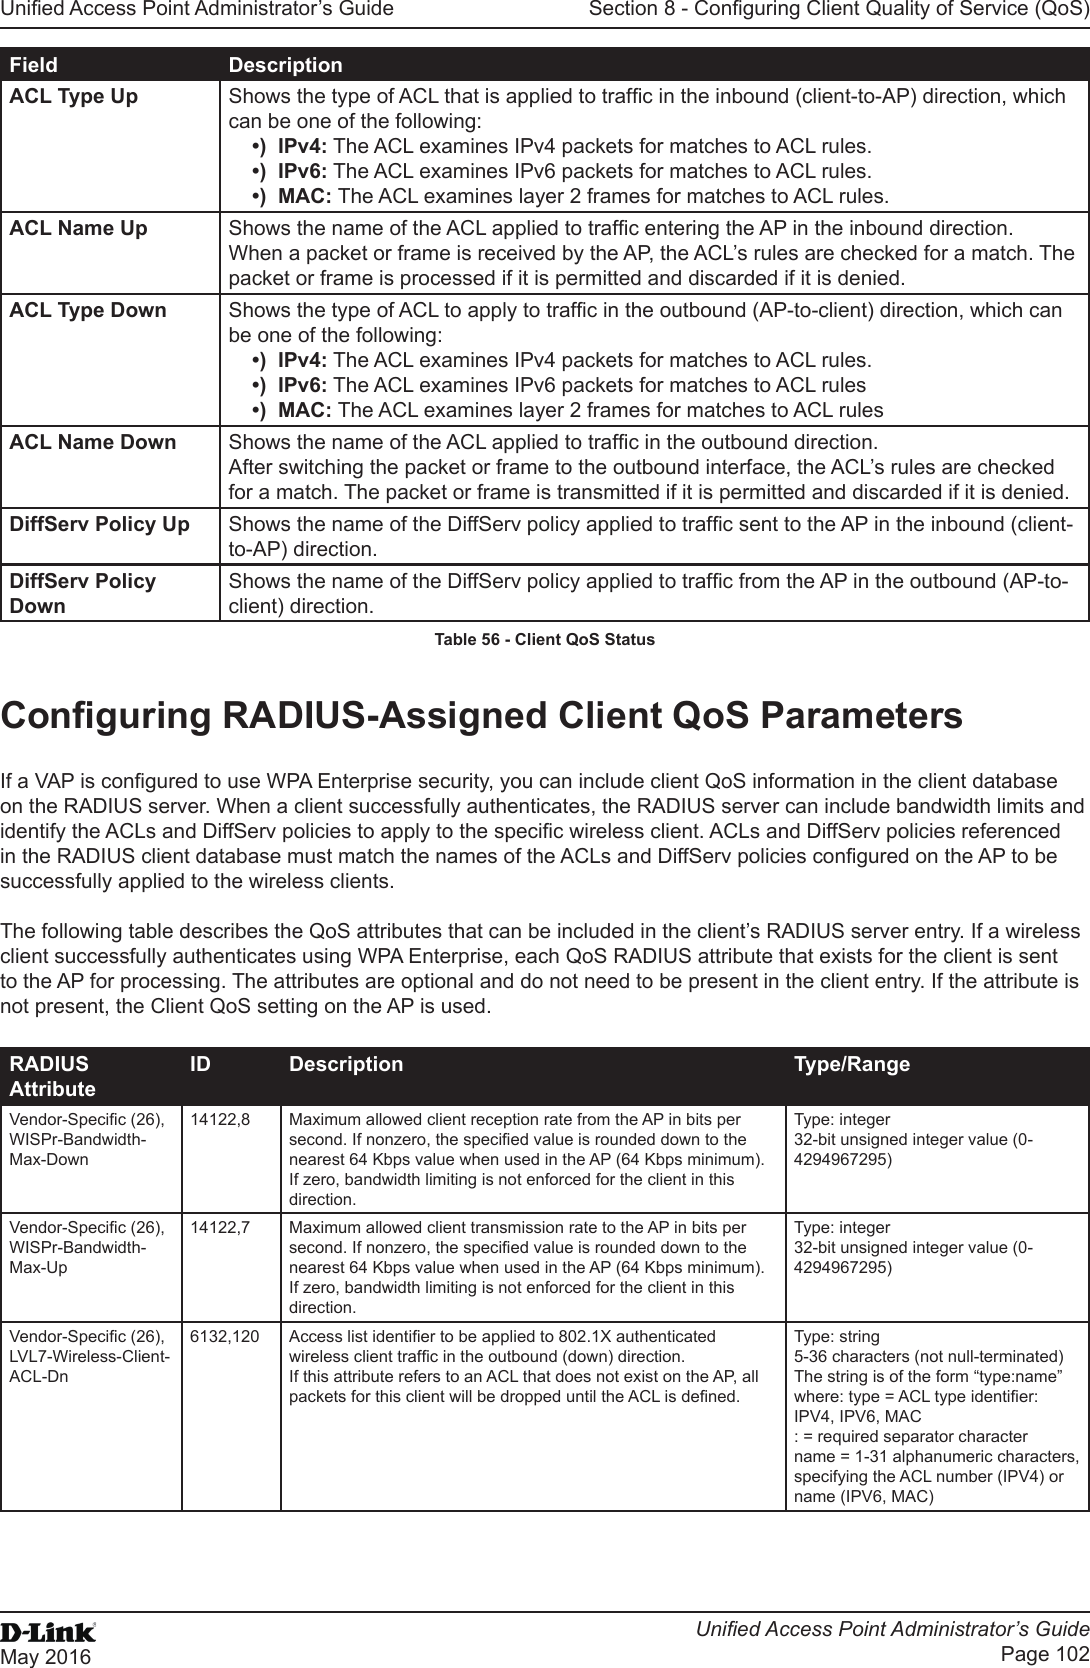 Unied Access Point Administrator’s GuideUnied Access Point Administrator’s GuidePage 102May 2016Section 8 - Conguring Client Quality of Service (QoS)Field DescriptionACL Type Up Shows the type of ACL that is applied to trafc in the inbound (client-to-AP) direction, which can be one of the following: •)  IPv4: The ACL examines IPv4 packets for matches to ACL rules.•)  IPv6: The ACL examines IPv6 packets for matches to ACL rules.•)  MAC: The ACL examines layer 2 frames for matches to ACL rules.ACL Name Up Shows the name of the ACL applied to trafc entering the AP in the inbound direction. When a packet or frame is received by the AP, the ACL’s rules are checked for a match. The packet or frame is processed if it is permitted and discarded if it is denied.ACL Type Down Shows the type of ACL to apply to trafc in the outbound (AP-to-client) direction, which can be one of the following: •)  IPv4: The ACL examines IPv4 packets for matches to ACL rules.•)  IPv6: The ACL examines IPv6 packets for matches to ACL rules•)  MAC: The ACL examines layer 2 frames for matches to ACL rulesACL Name Down Shows the name of the ACL applied to trafc in the outbound direction. After switching the packet or frame to the outbound interface, the ACL’s rules are checked for a match. The packet or frame is transmitted if it is permitted and discarded if it is denied.DiffServ Policy Up Shows the name of the DiffServ policy applied to trafc sent to the AP in the inbound (client-to-AP) direction.DiffServ Policy DownShows the name of the DiffServ policy applied to trafc from the AP in the outbound (AP-to-client) direction.Table 56 - Client QoS StatusConguring RADIUS-Assigned Client QoS ParametersIf a VAP is congured to use WPA Enterprise security, you can include client QoS information in the client database on the RADIUS server. When a client successfully authenticates, the RADIUS server can include bandwidth limits and identify the ACLs and DiffServ policies to apply to the specic wireless client. ACLs and DiffServ policies referenced in the RADIUS client database must match the names of the ACLs and DiffServ policies congured on the AP to be successfully applied to the wireless clients.The following table describes the QoS attributes that can be included in the client’s RADIUS server entry. If a wireless client successfully authenticates using WPA Enterprise, each QoS RADIUS attribute that exists for the client is sent to the AP for processing. The attributes are optional and do not need to be present in the client entry. If the attribute is not present, the Client QoS setting on the AP is used.RADIUS AttributeID Description Type/RangeVendor-Specic (26), WISPr-Bandwidth-Max-Down14122,8 Maximum allowed client reception rate from the AP in bits per second. If nonzero, the specied value is rounded down to the nearest 64 Kbps value when used in the AP (64 Kbps minimum). If zero, bandwidth limiting is not enforced for the client in this direction.Type: integer32-bit unsigned integer value (0-4294967295)Vendor-Specic (26), WISPr-Bandwidth-Max-Up14122,7 Maximum allowed client transmission rate to the AP in bits per second. If nonzero, the specied value is rounded down to the nearest 64 Kbps value when used in the AP (64 Kbps minimum). If zero, bandwidth limiting is not enforced for the client in this direction.Type: integer32-bit unsigned integer value (0-4294967295)Vendor-Specic (26), LVL7-Wireless-Client-ACL-Dn6132,120 Access list identier to be applied to 802.1X authenticated wireless client trafc in the outbound (down) direction.If this attribute refers to an ACL that does not exist on the AP, all packets for this client will be dropped until the ACL is dened.Type: string5-36 characters (not null-terminated)The string is of the form “type:name” where: type = ACL type identier: IPV4, IPV6, MAC: = required separator charactername = 1-31 alphanumeric characters, specifying the ACL number (IPV4) or name (IPV6, MAC)